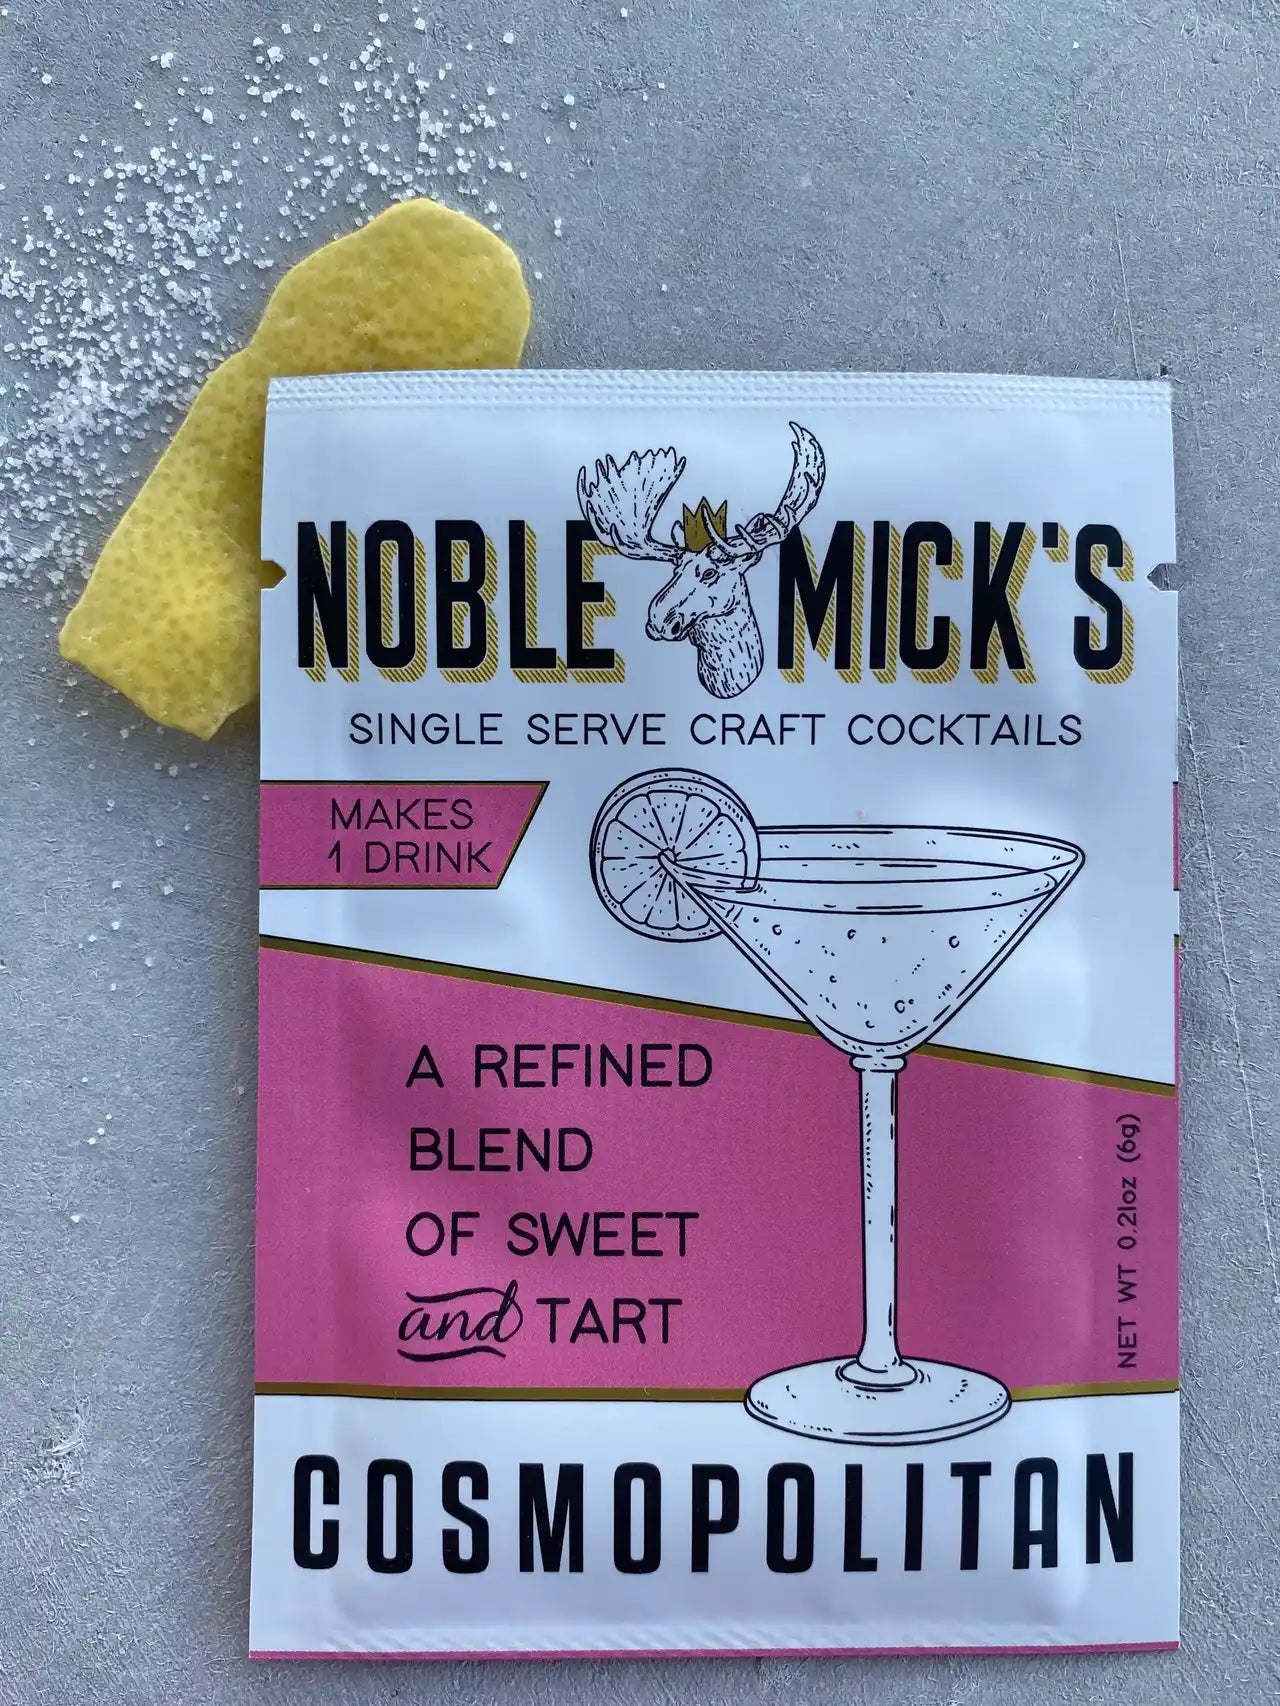 noble mick's single serve packet of cosmopolitan mix on a bar top with sugar and a lemon peel.